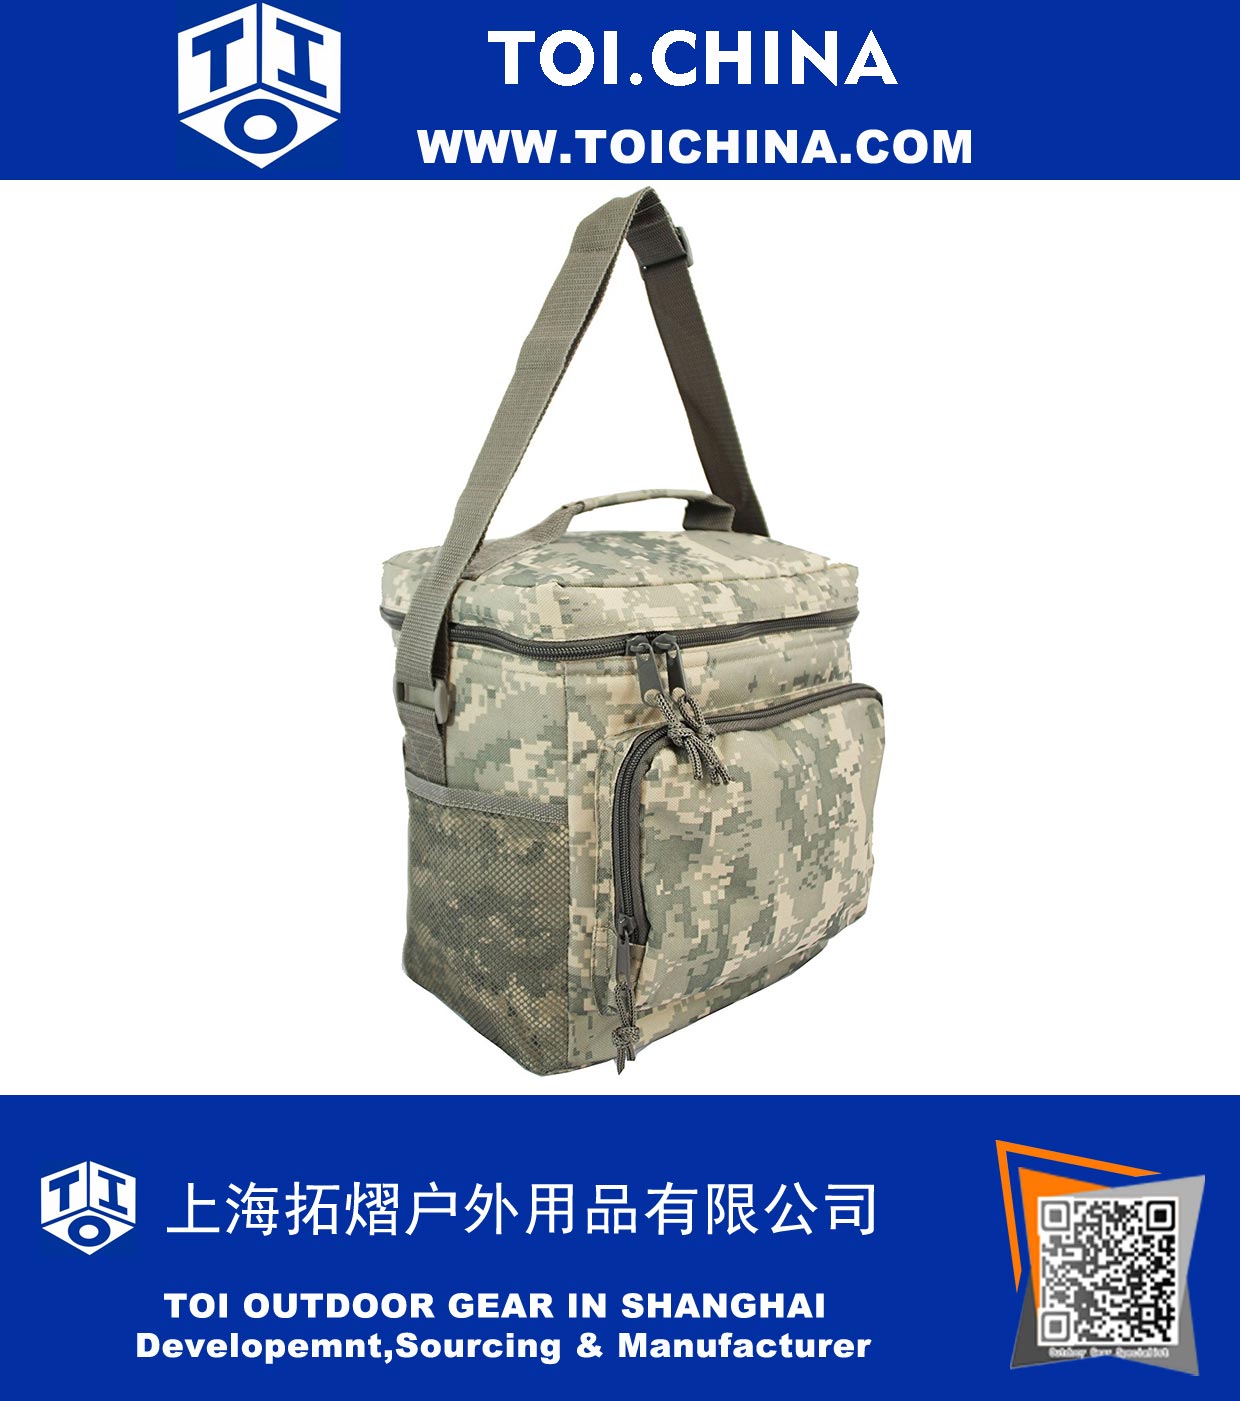 Deluxe Tan Digital Camouflage with pocket 12-pack Vertical Load Insulated Cooler Tote Bag Camo Bag